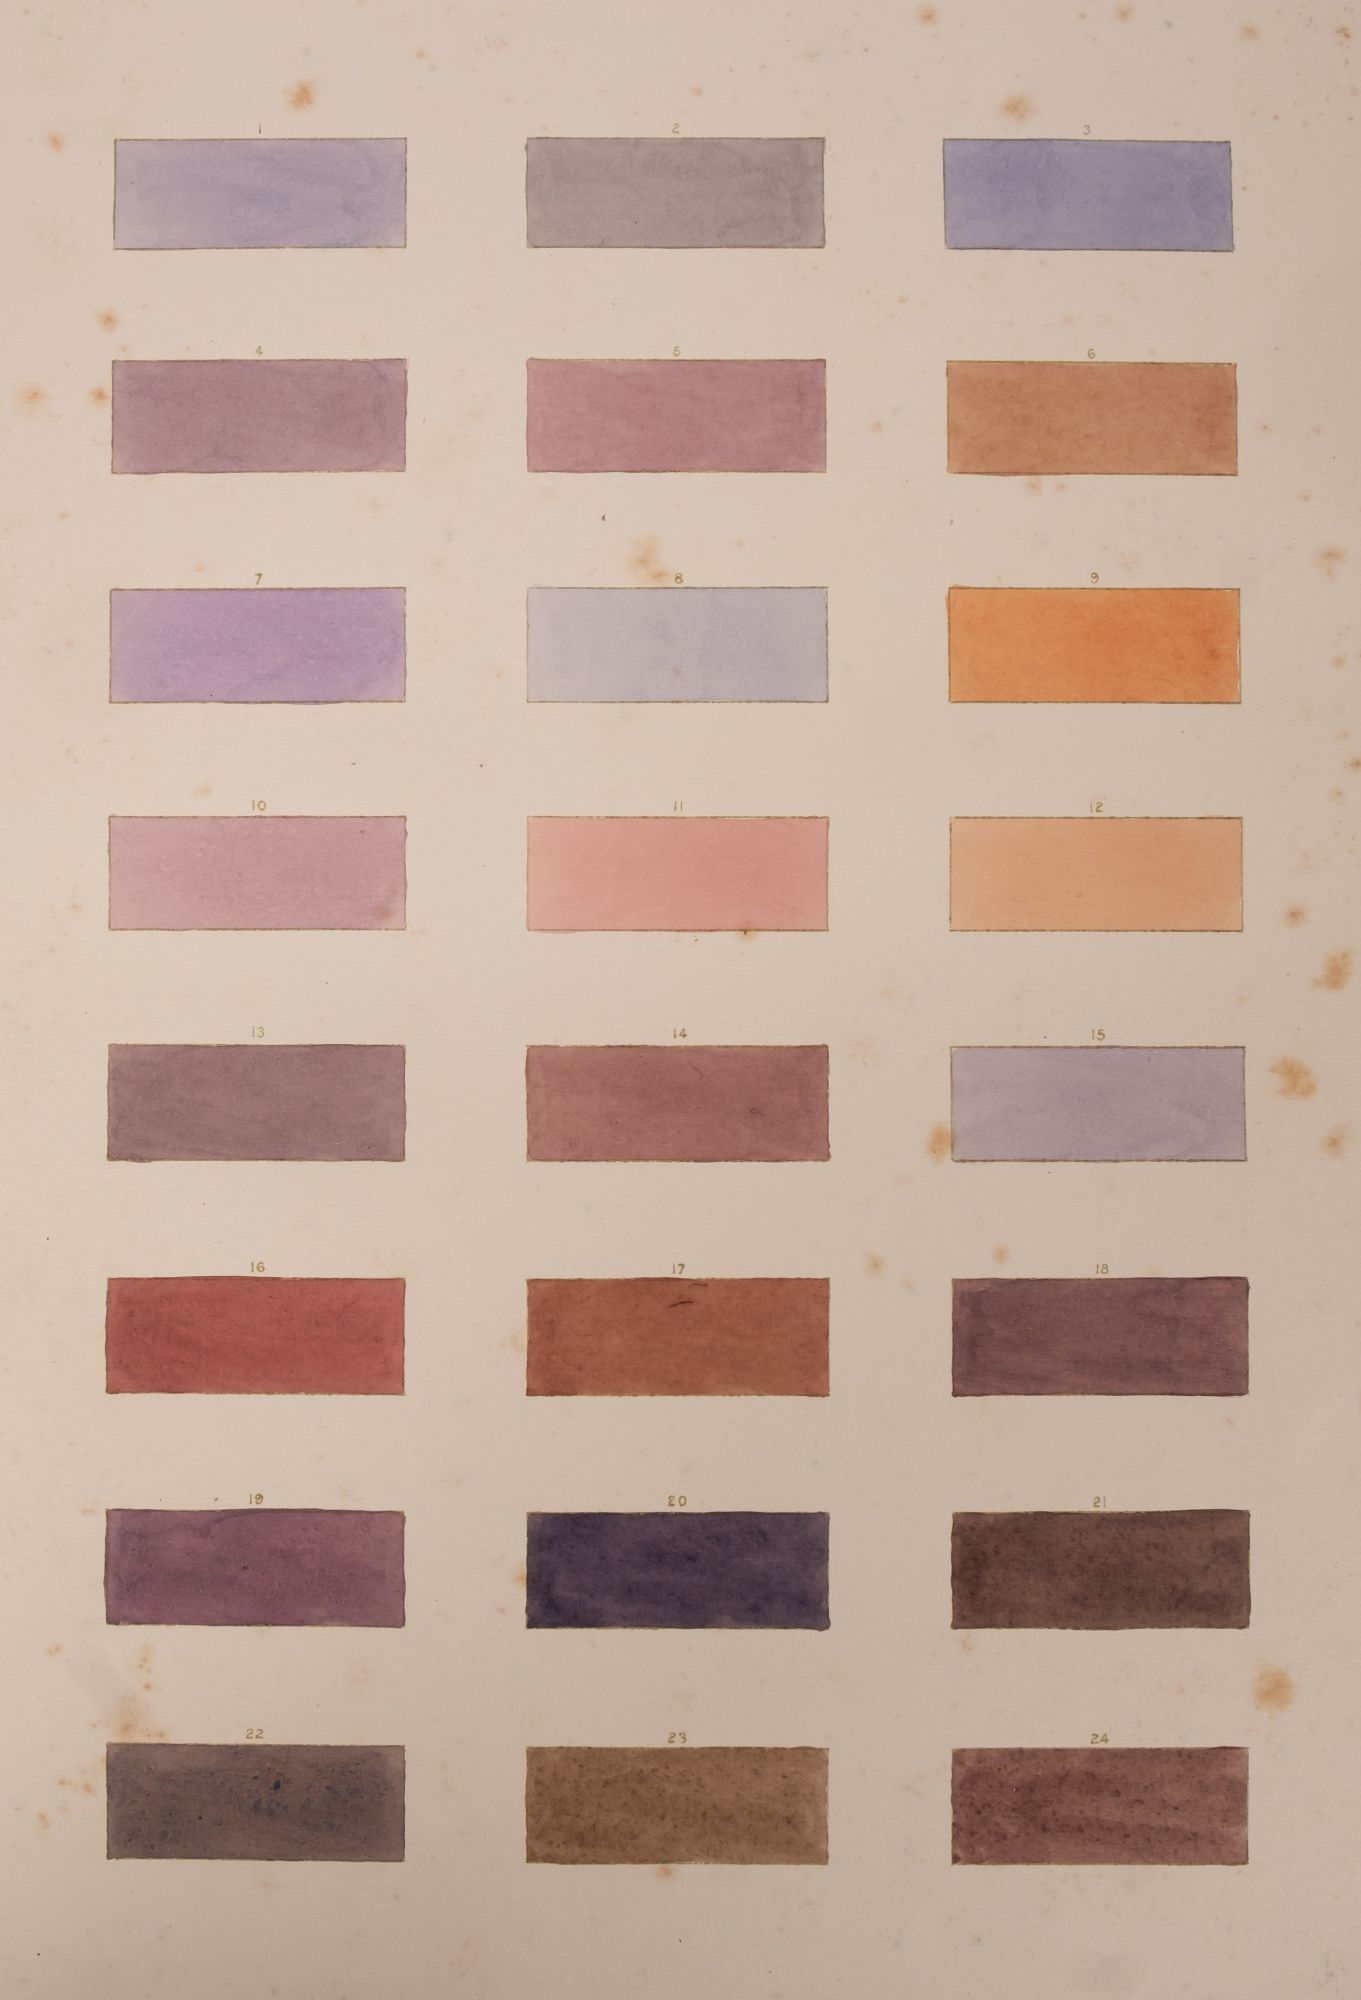 PENLEY, Aaron - The English School of Painting in Water-Colours; Its Theory and Practice, - Image 7 of 8